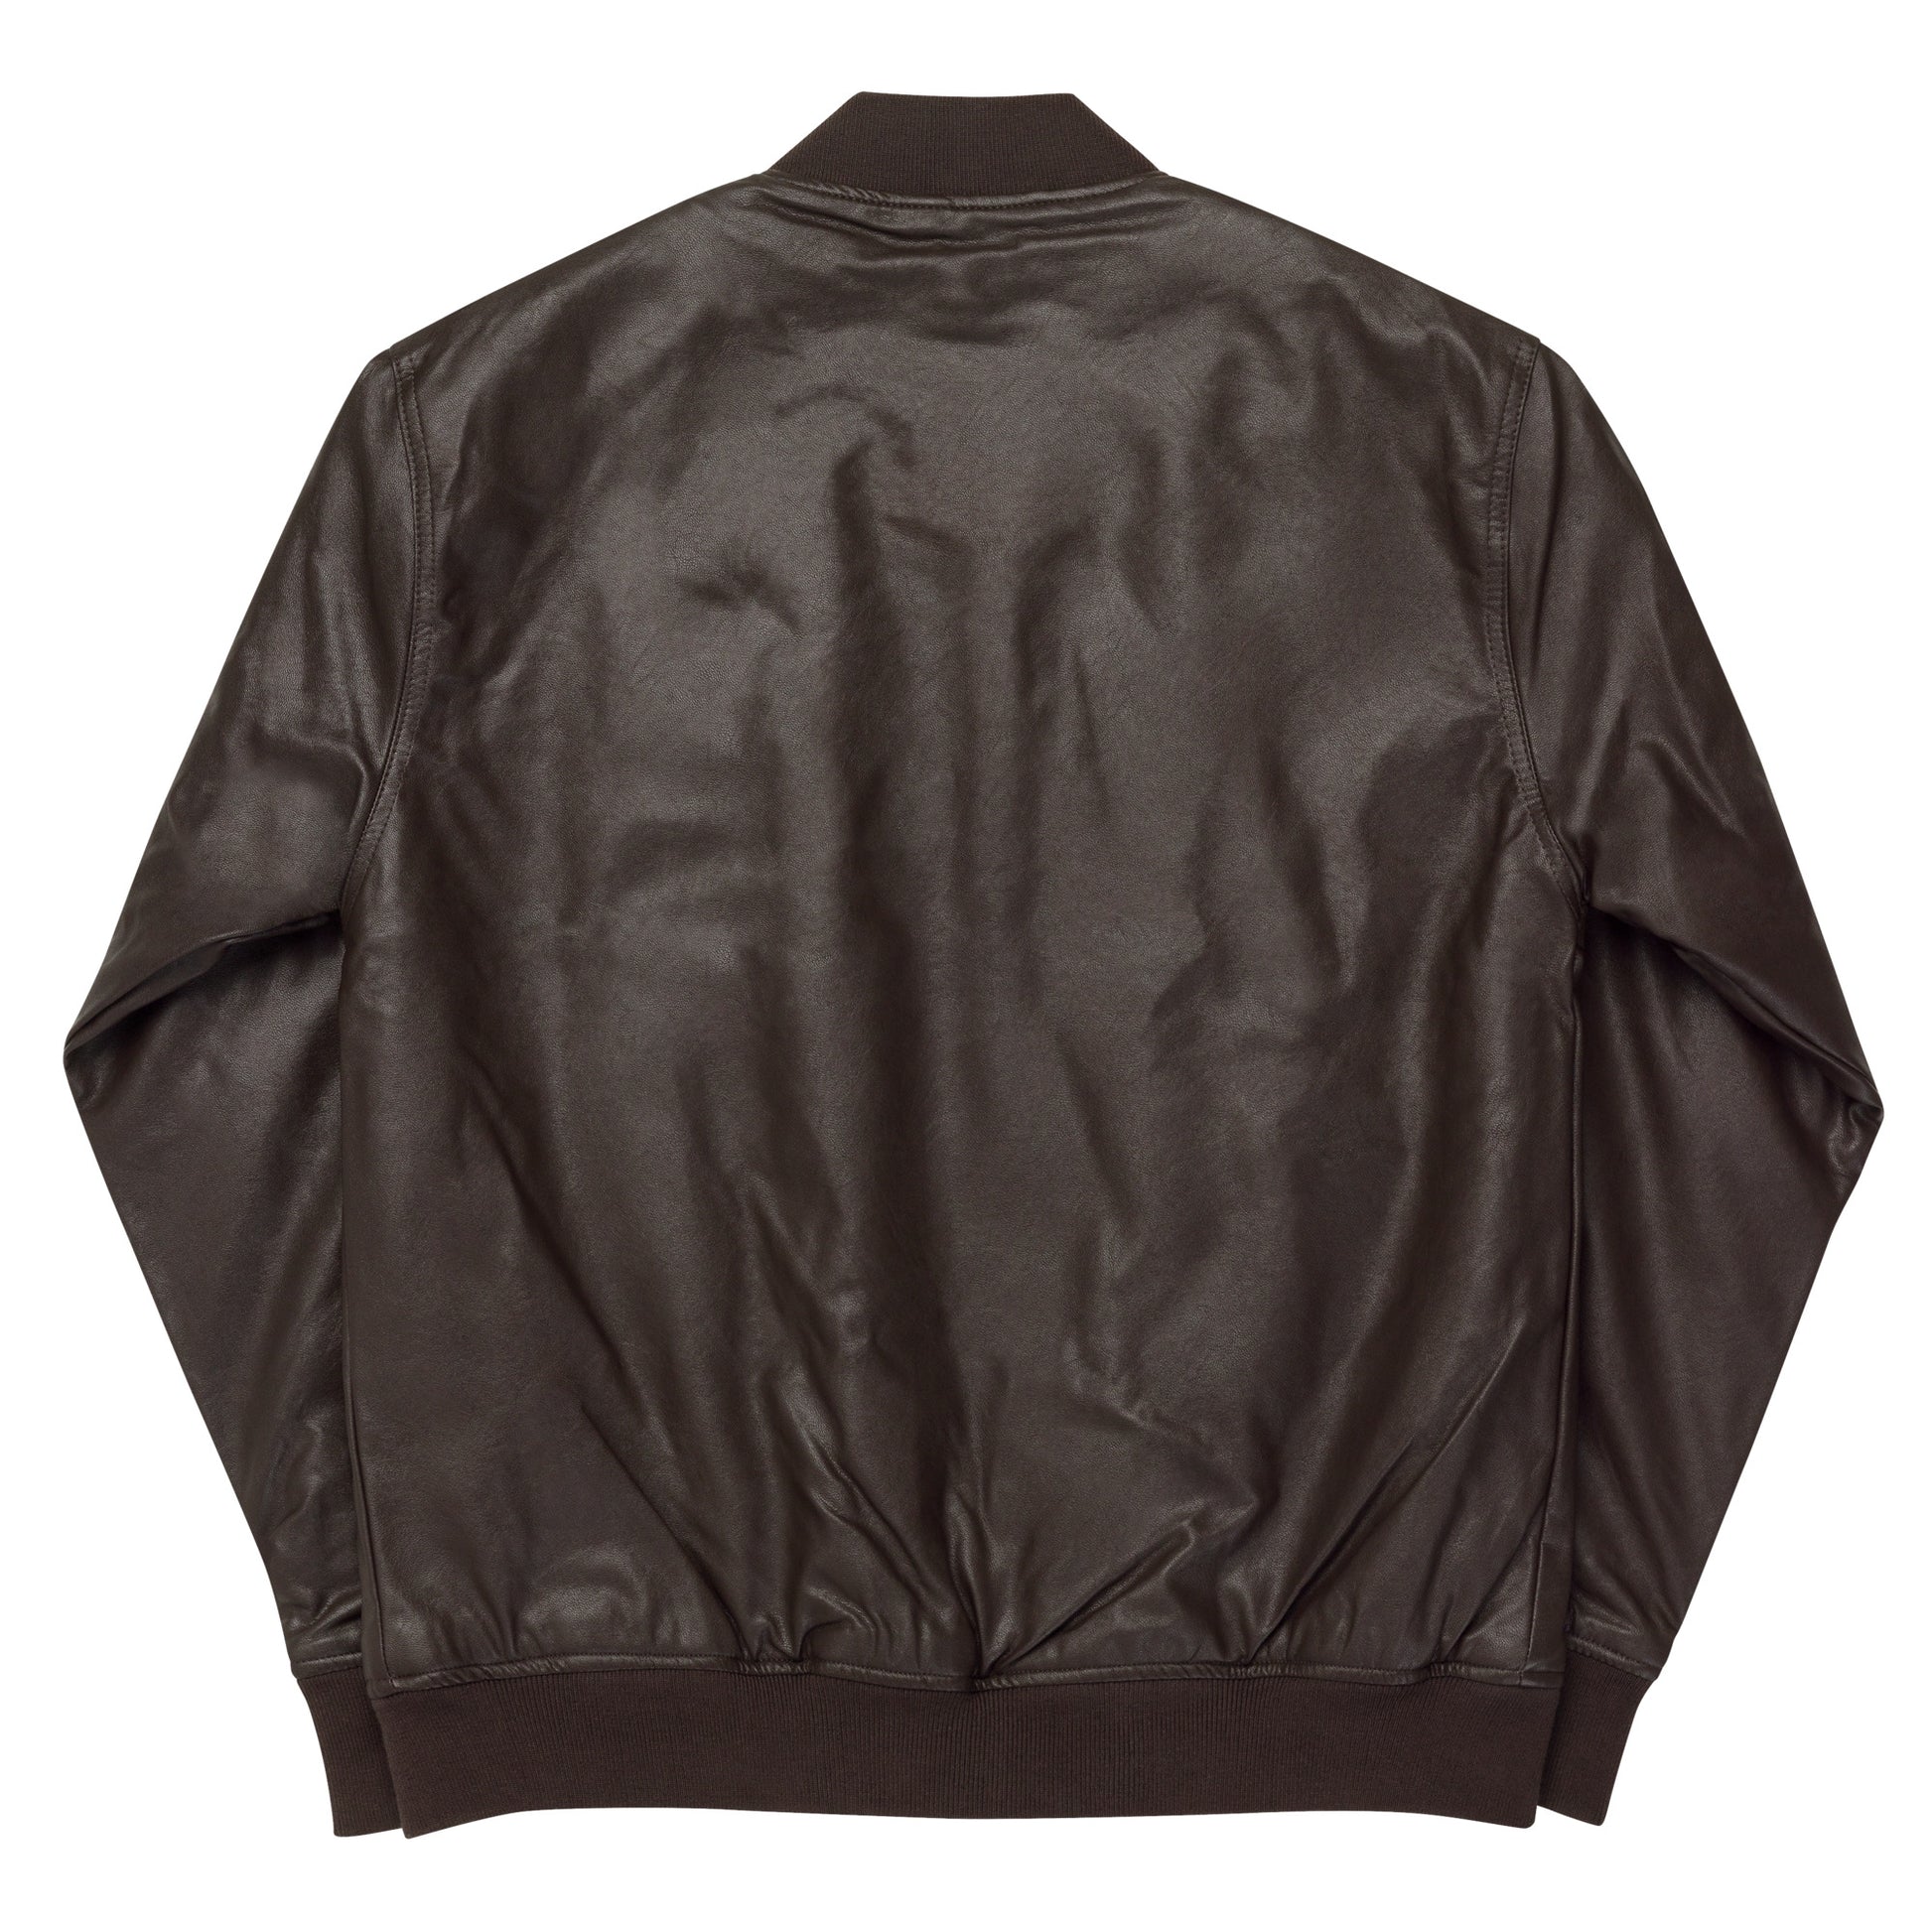 Wildfire Cigars embroidered faux leather bomber jacket in brown facing the back